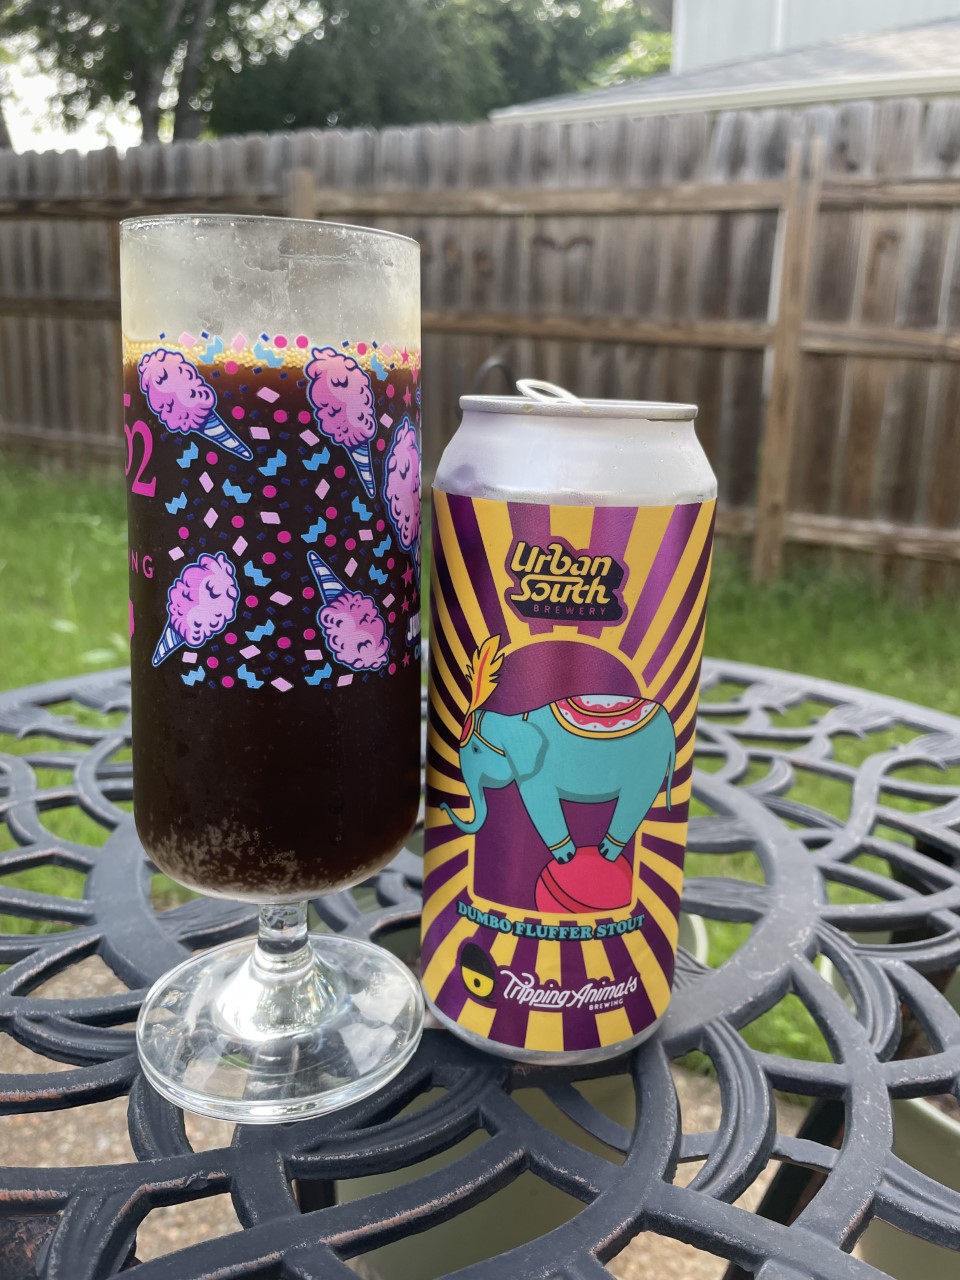 Urban South HTX & Tripping Animals Dumbo Fluffer Stout 